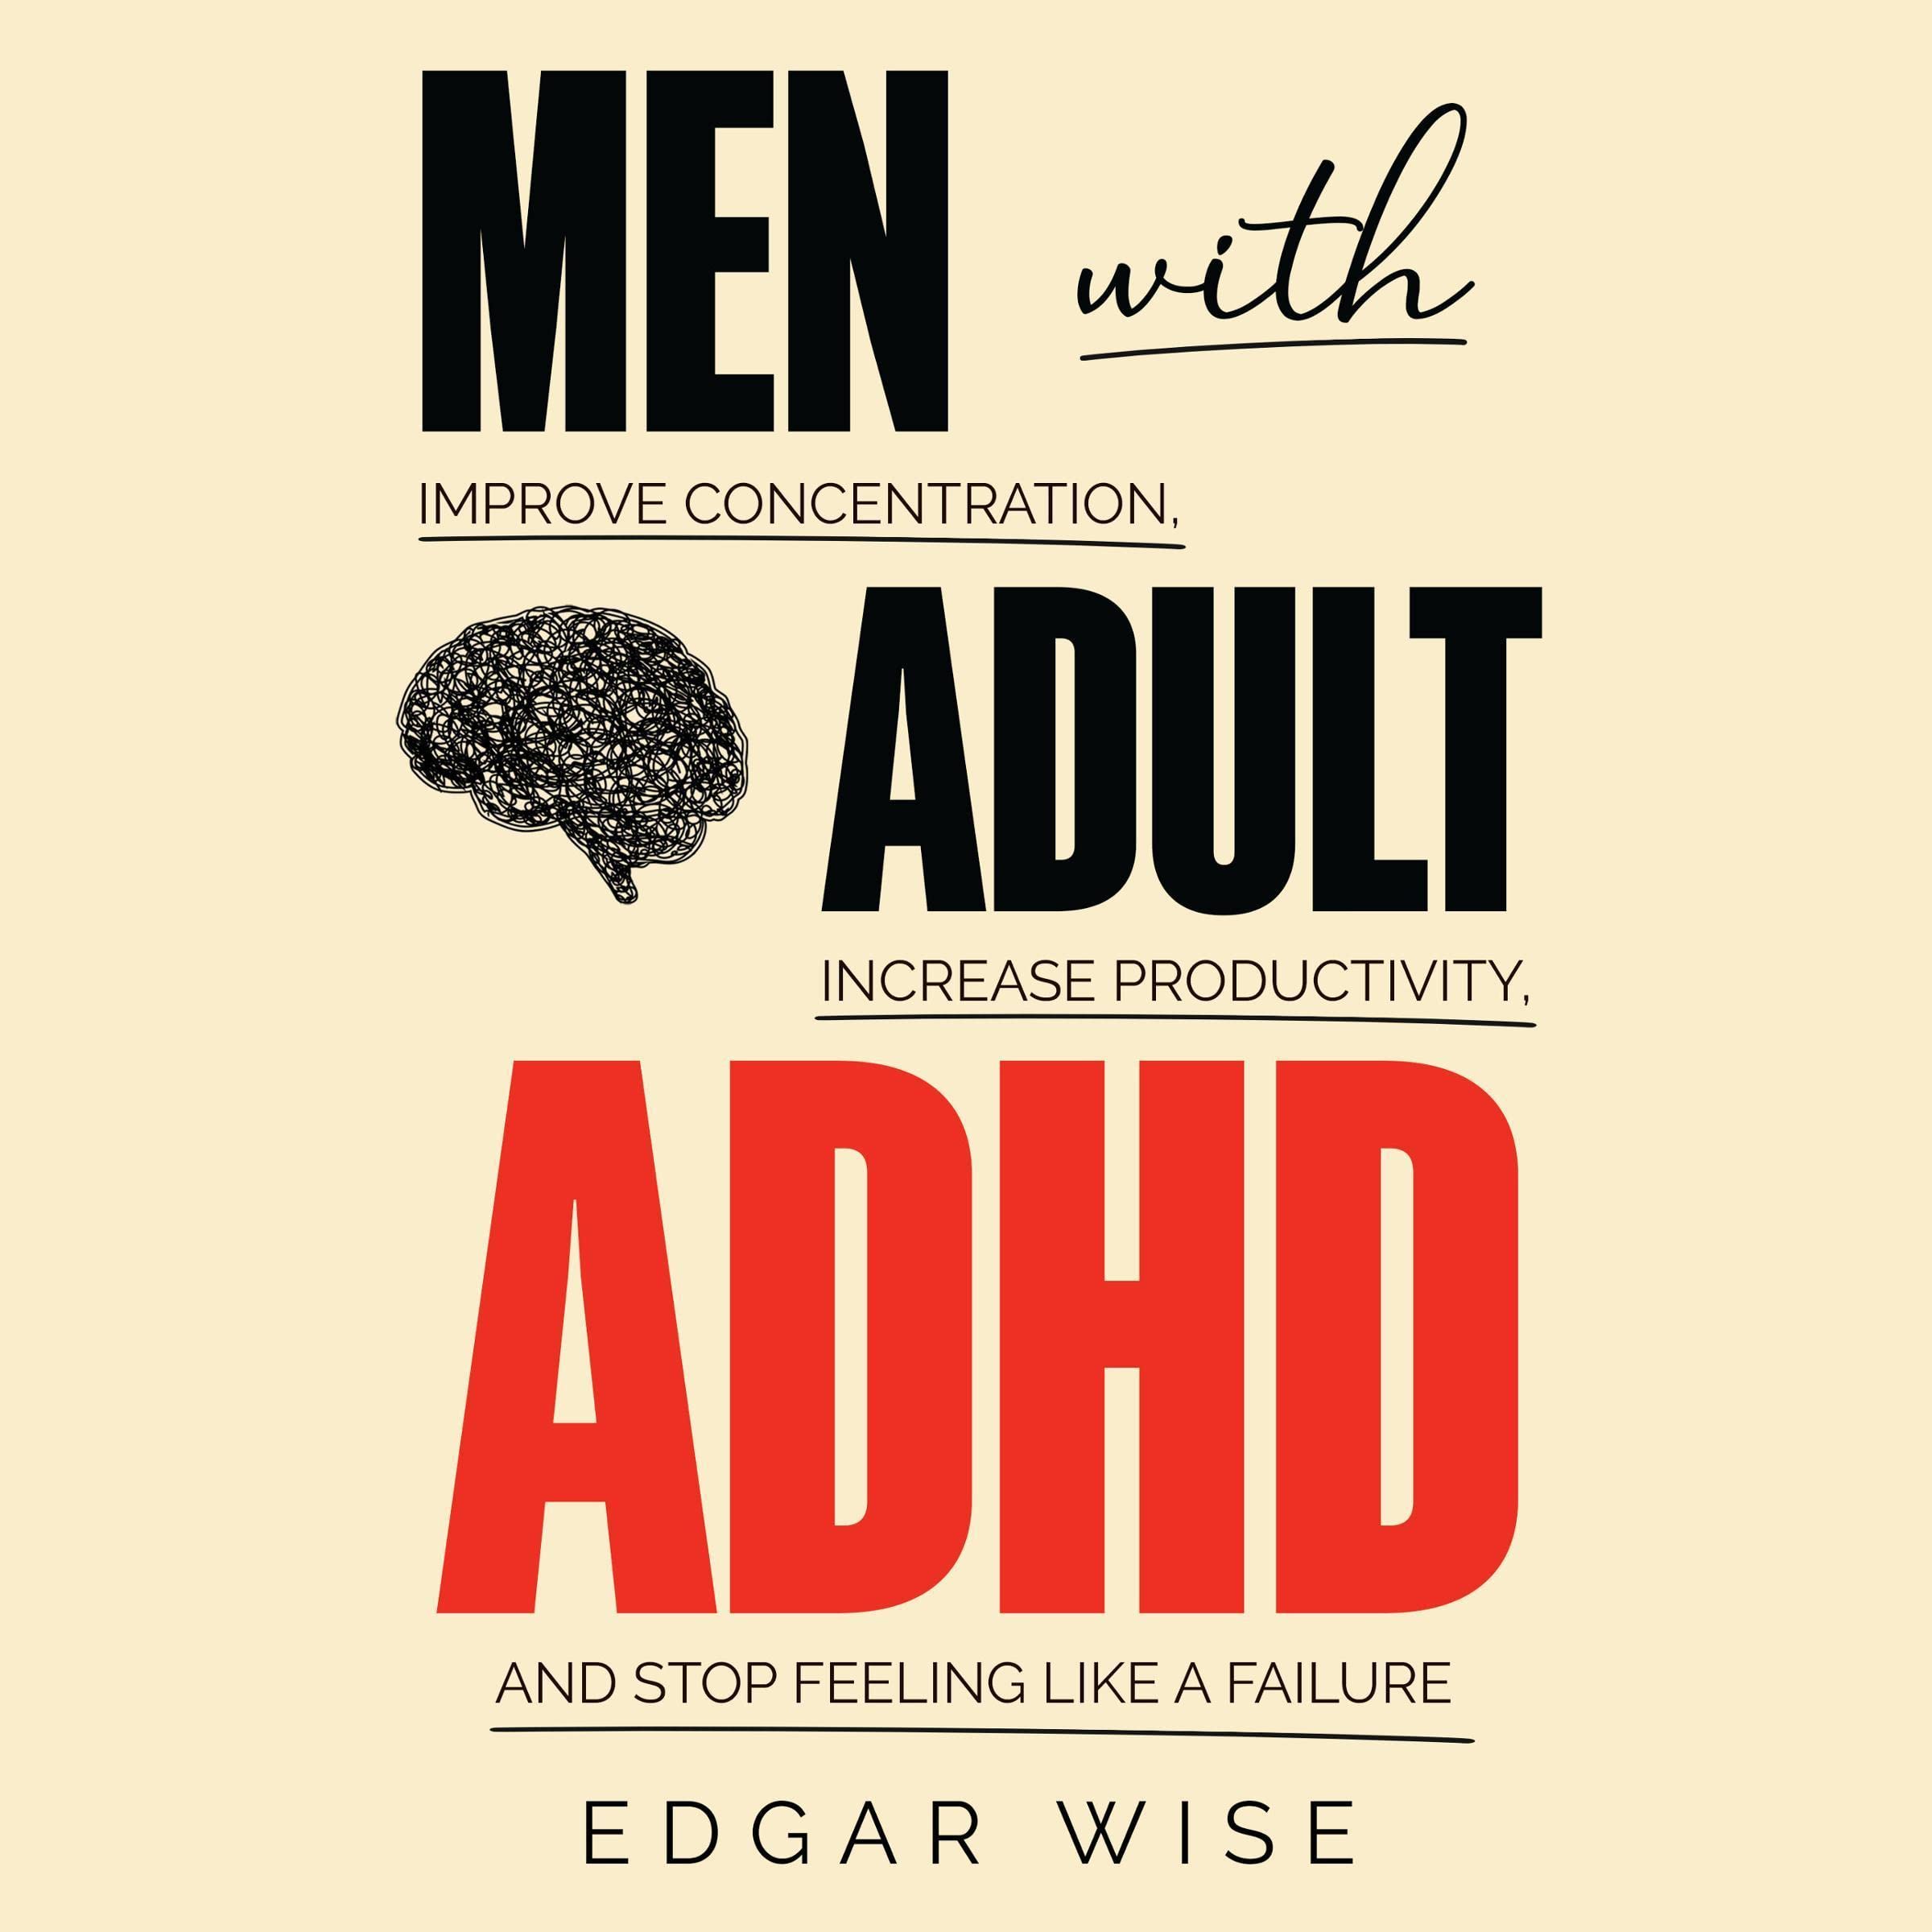 Men with Adult ADHD: Improve Concentration, Increase Productivity, and Stop Feeling Like a Failure